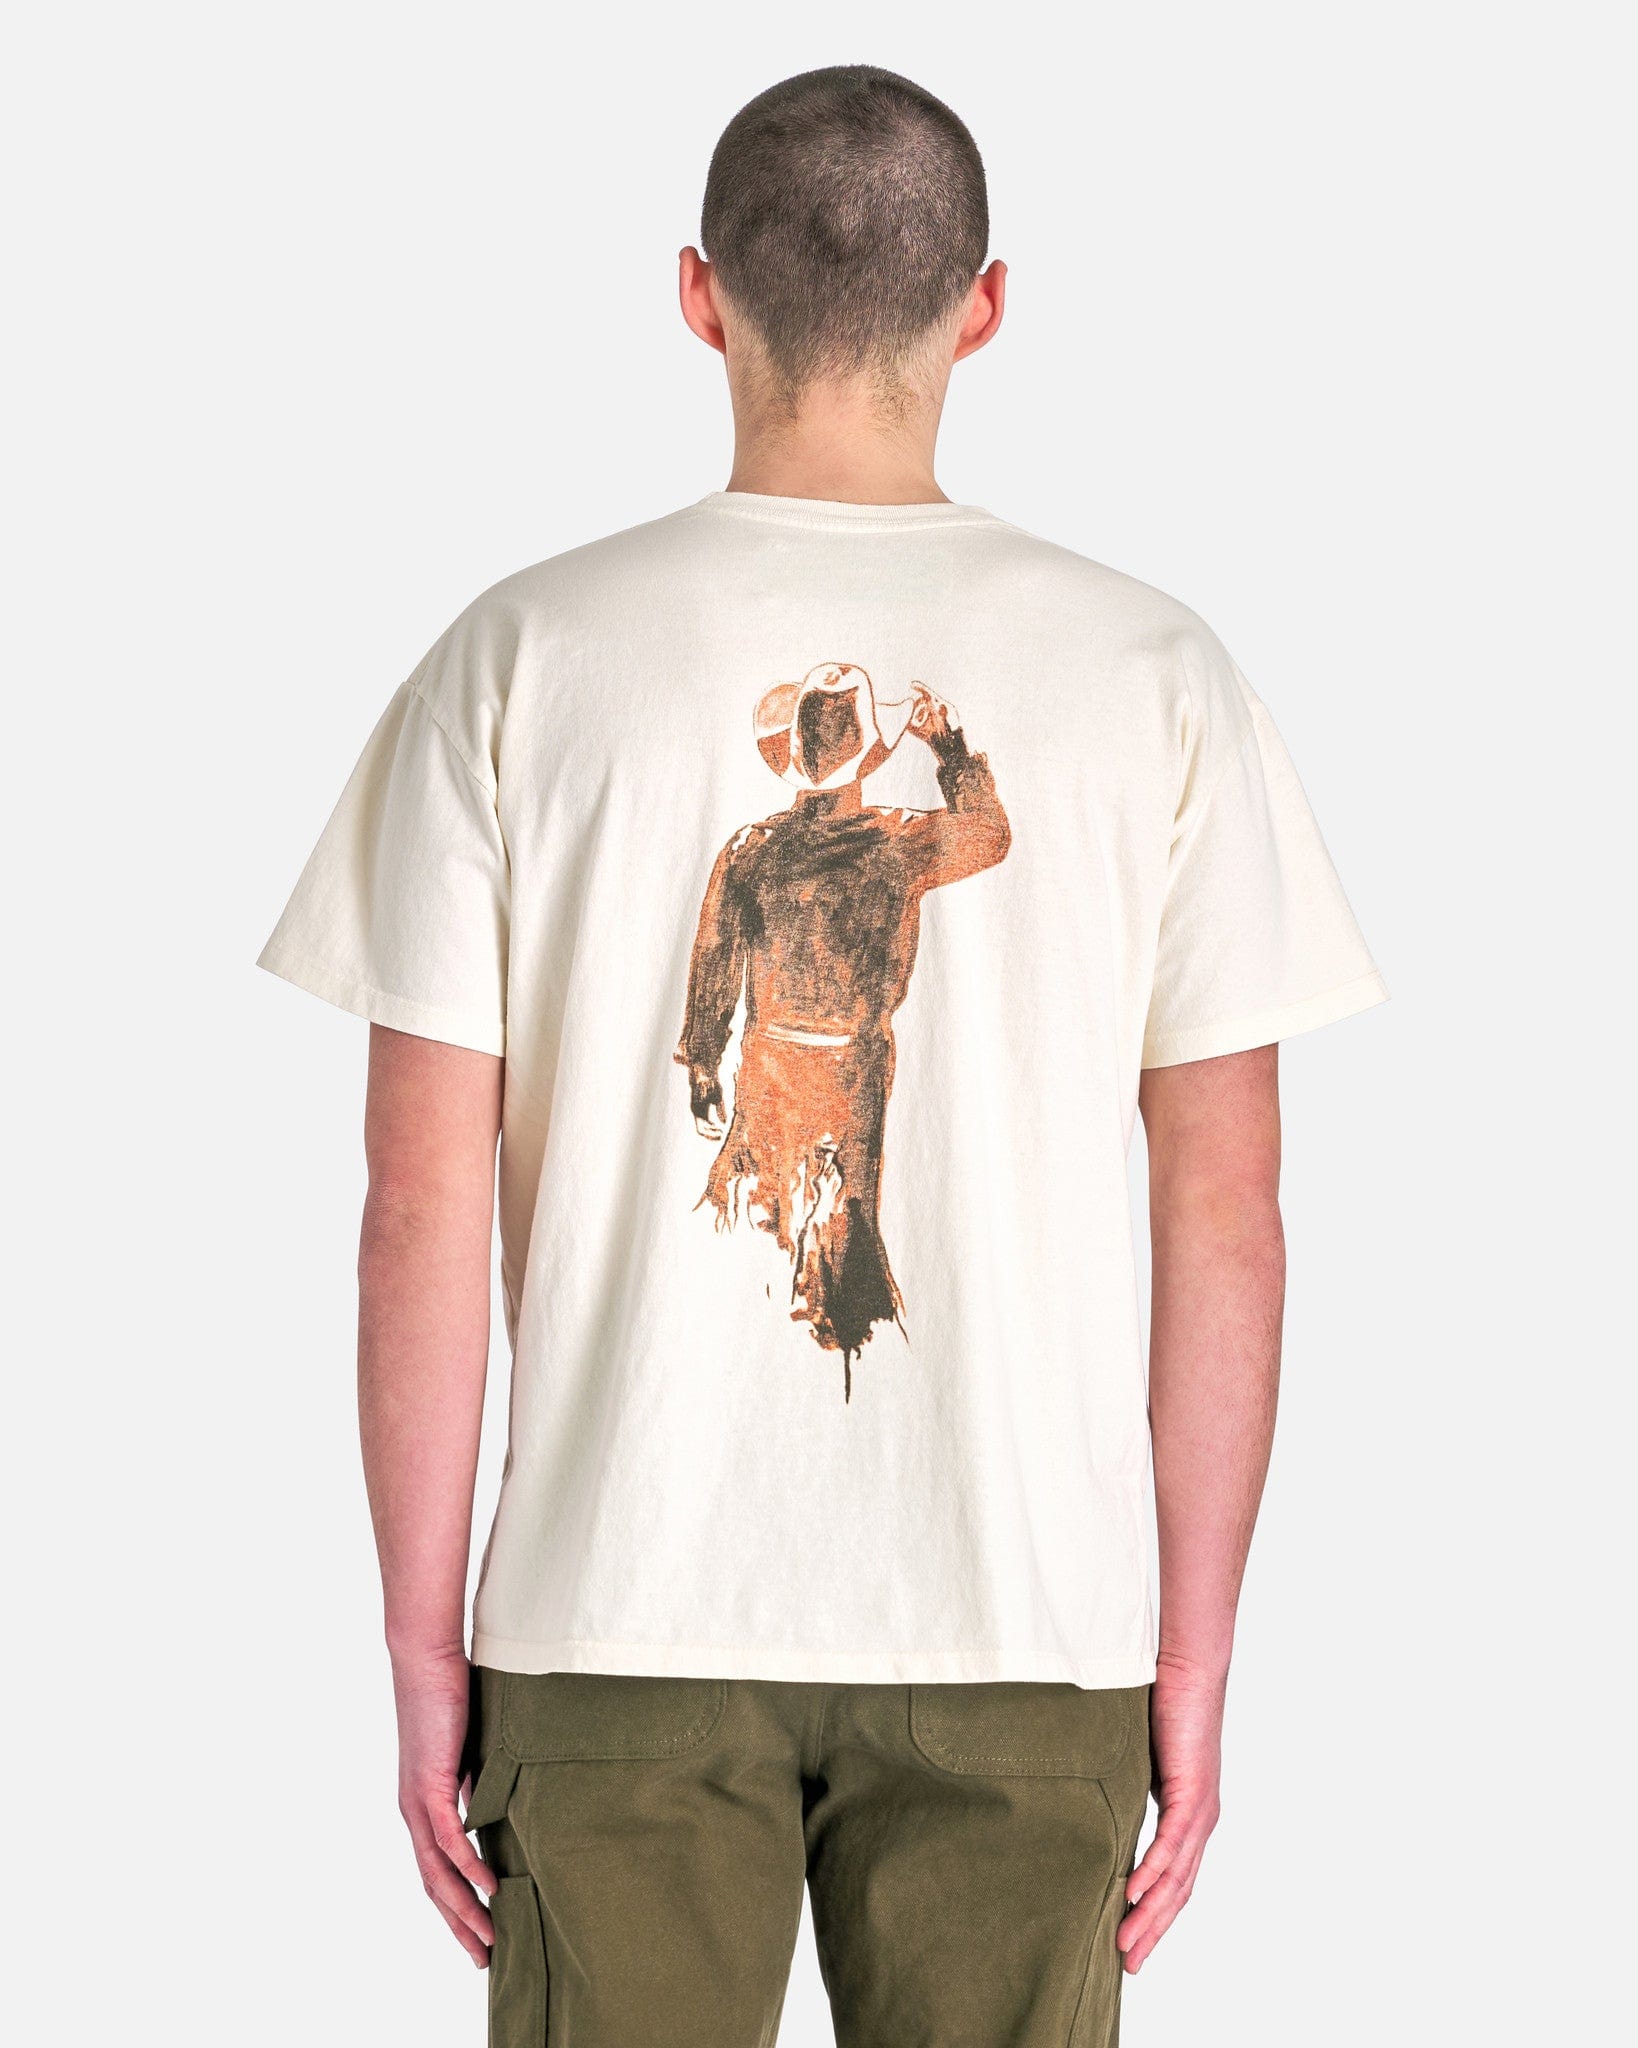 One of These Days Men's T-Shirts Wild West Tee in Bone